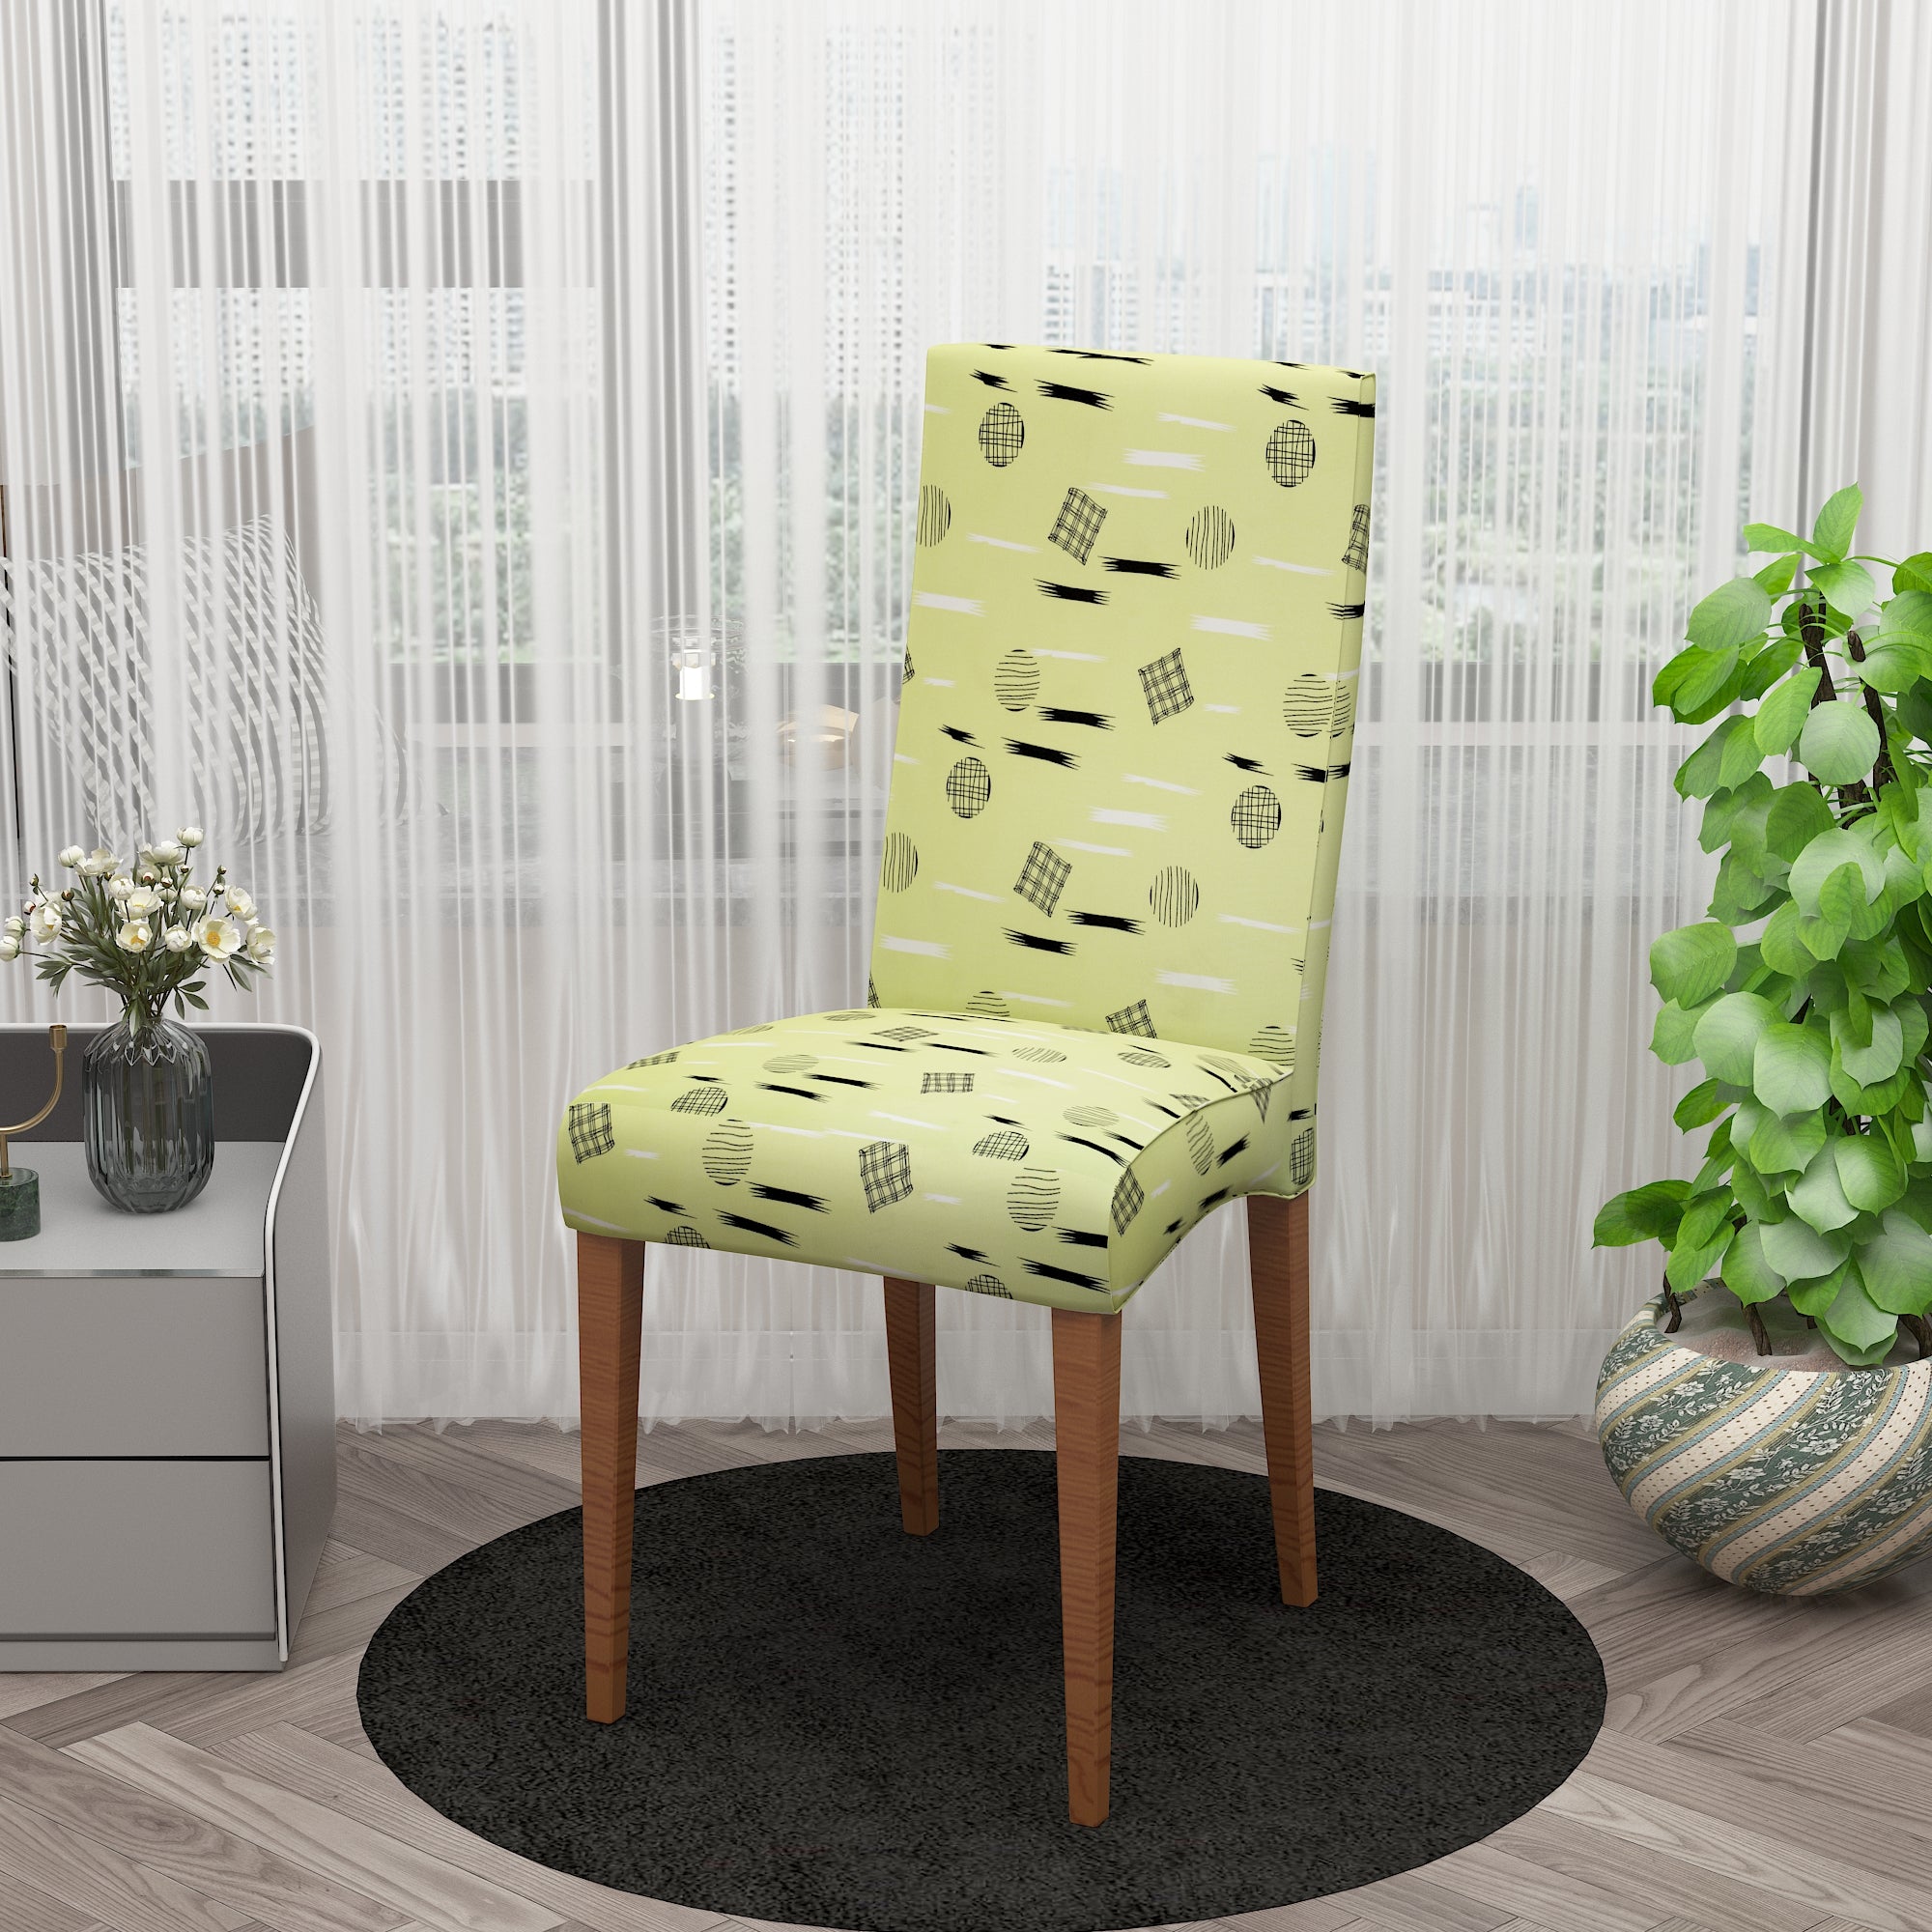 Polyester Spandex Stretchable Printed Chair Cover, MG44